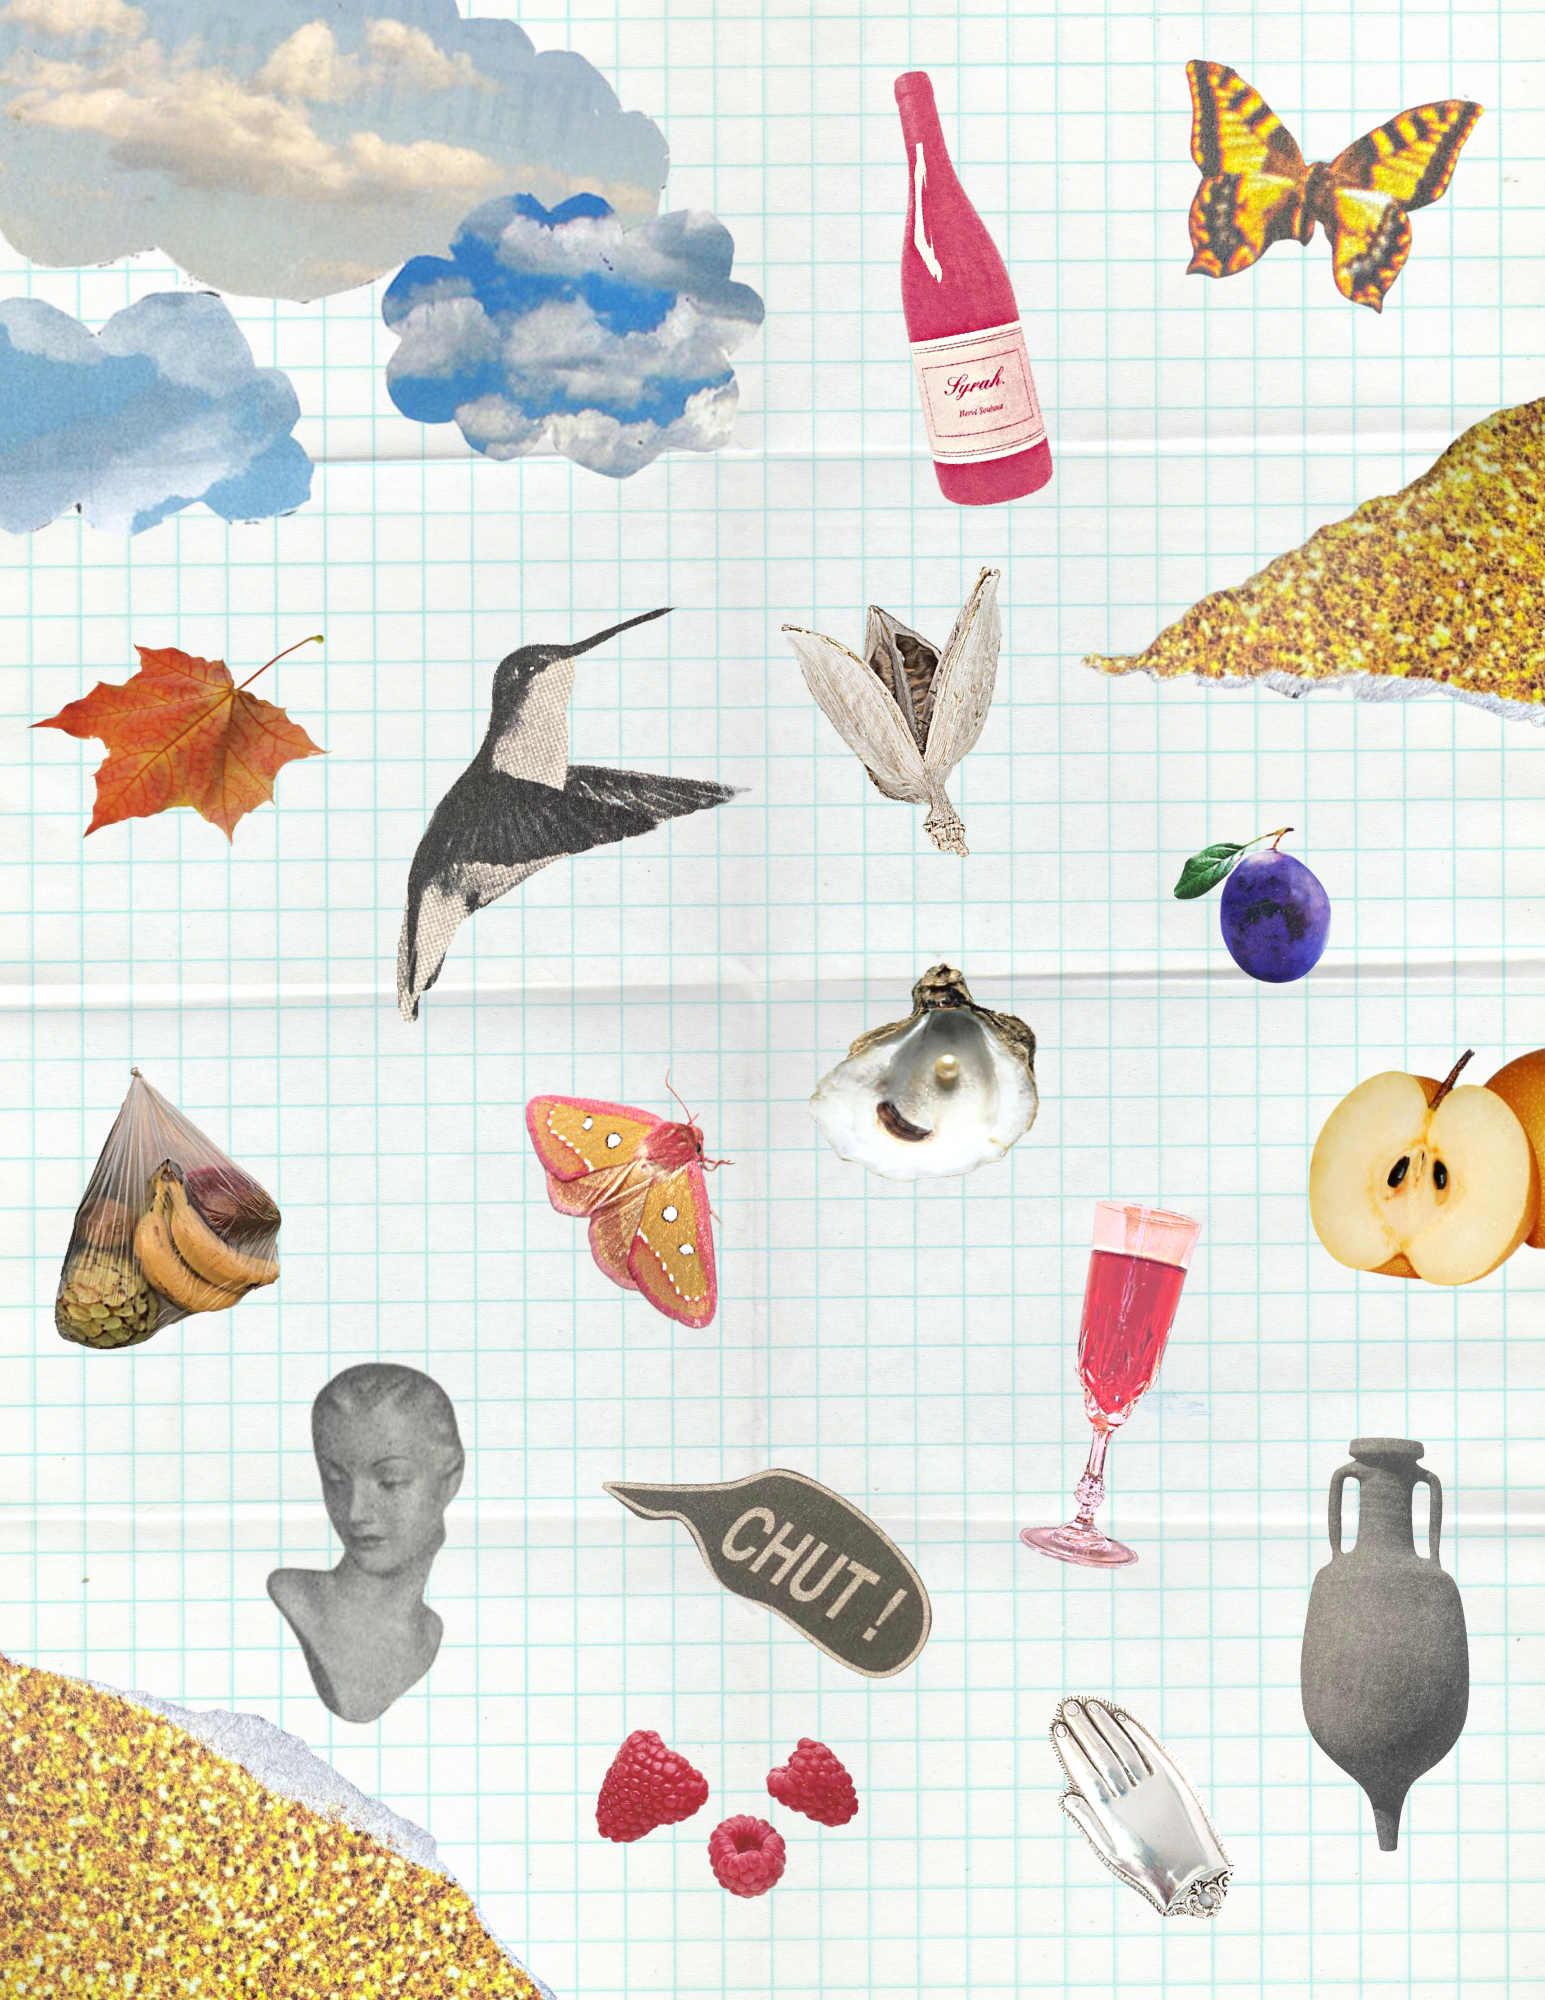 Collage Kit #2 — Break in the Clouds